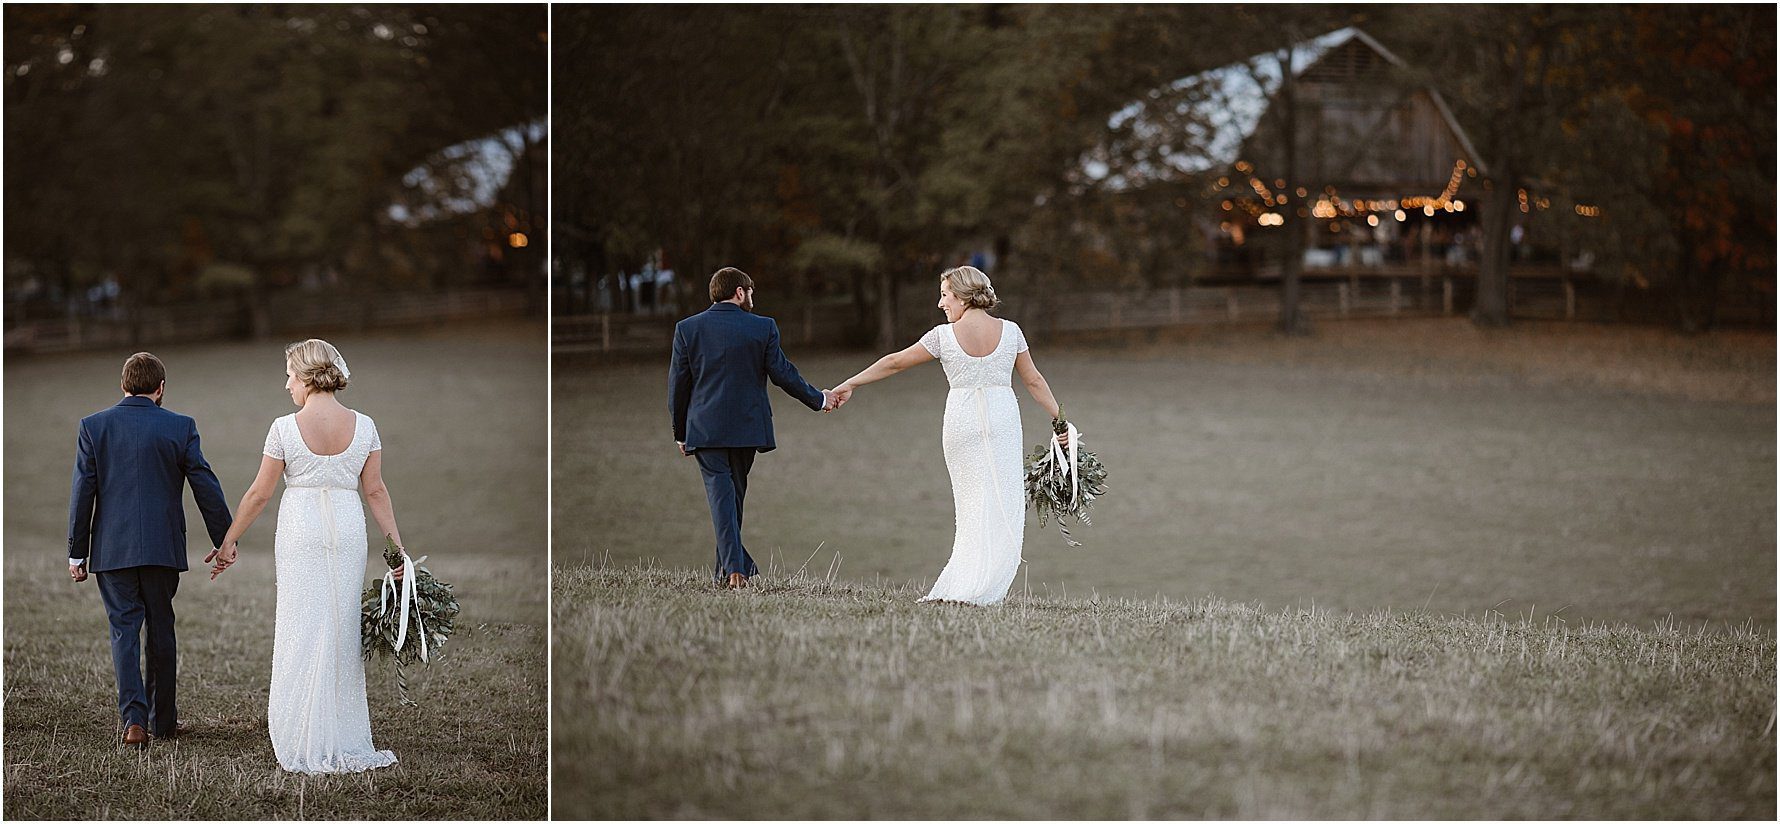 Barn Wedding Venues in Knoxville | Erin Morrison Photography www.erinmorrisonphotography.com